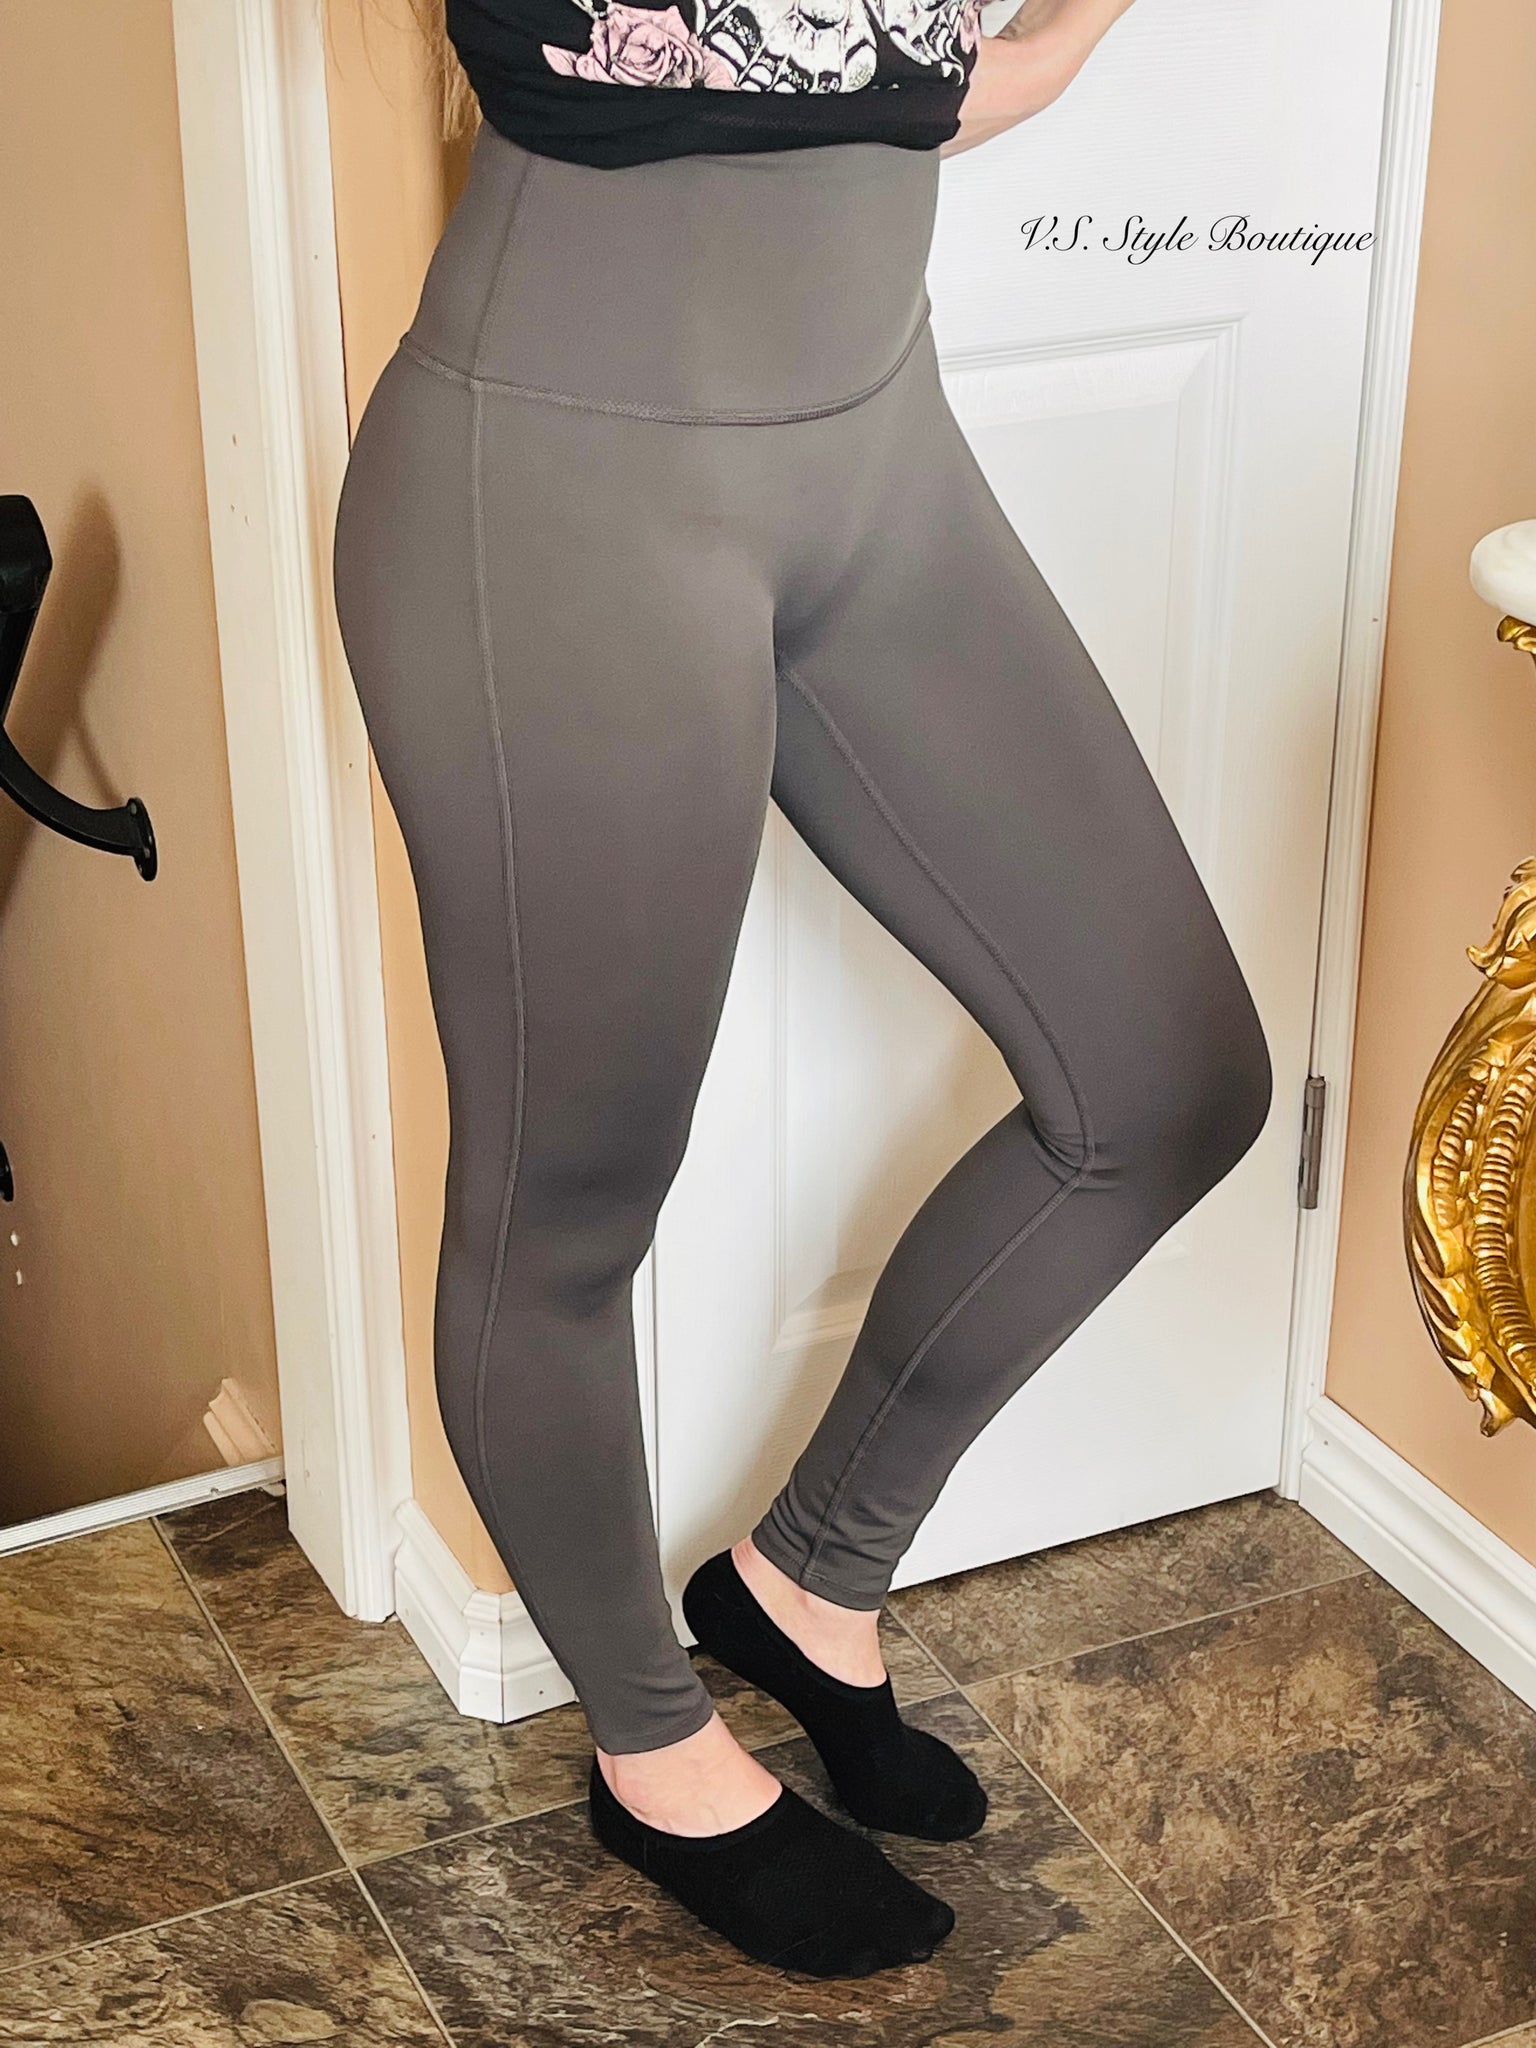 High Waisted Grey Seamless Black Leggings For Women Perfect For Workout,  Fitness Women, Casual Wear, Spring/Summer Sports, Jogging, And Jegging XL  Size 201204 From Kong003, $9.08